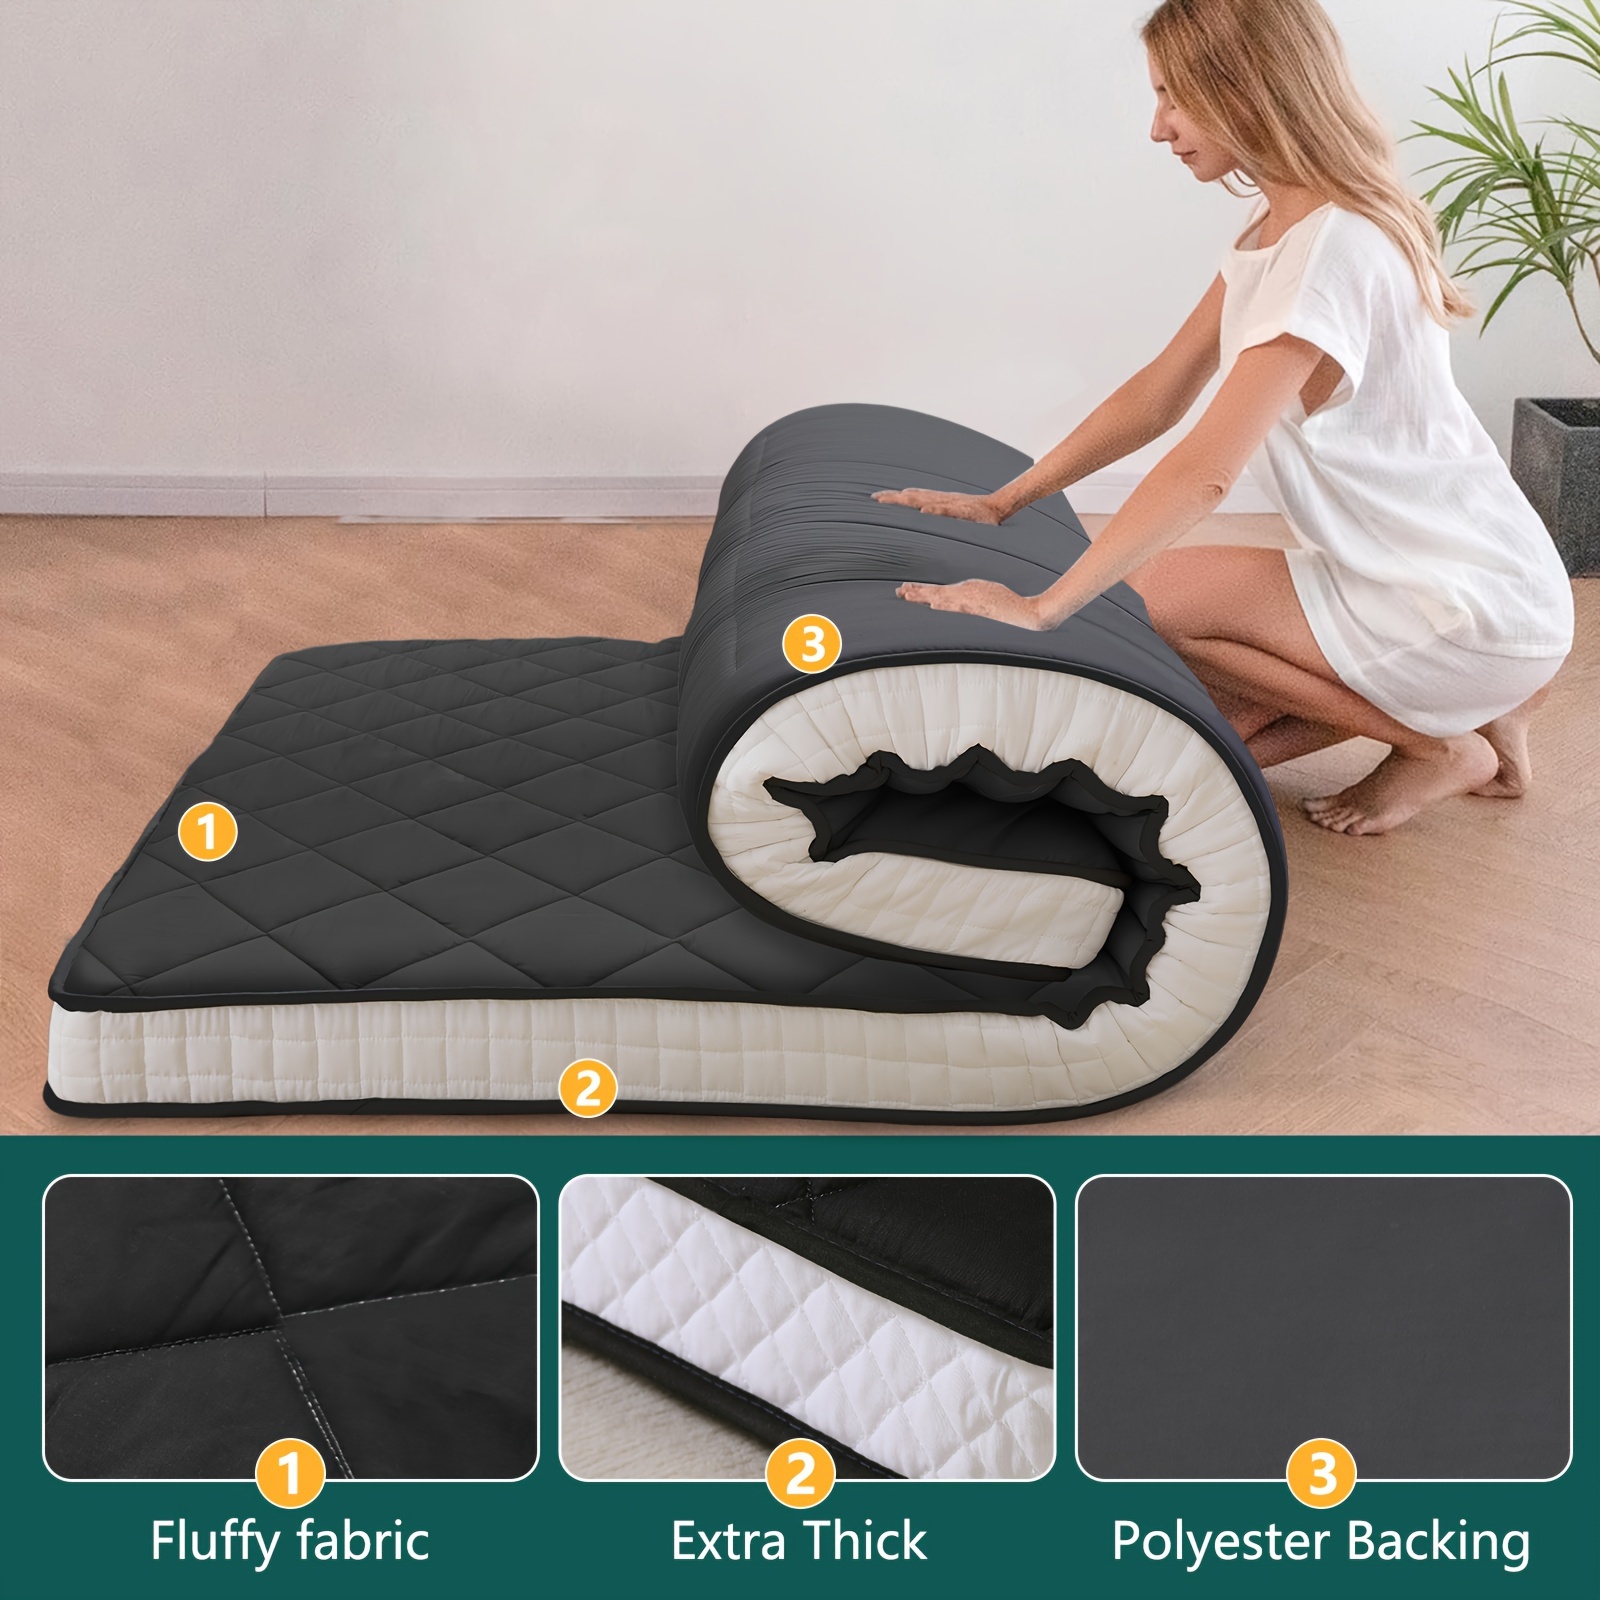 

Lilypelle Japanese Floor Mattress, Extra Thick Memory Foam Futon Mattress, Foldable Roll Up Sleeping Pad, Futon Mattress, With Bandage And Storage Bag, 80" L×39" Wtwin Size, Black